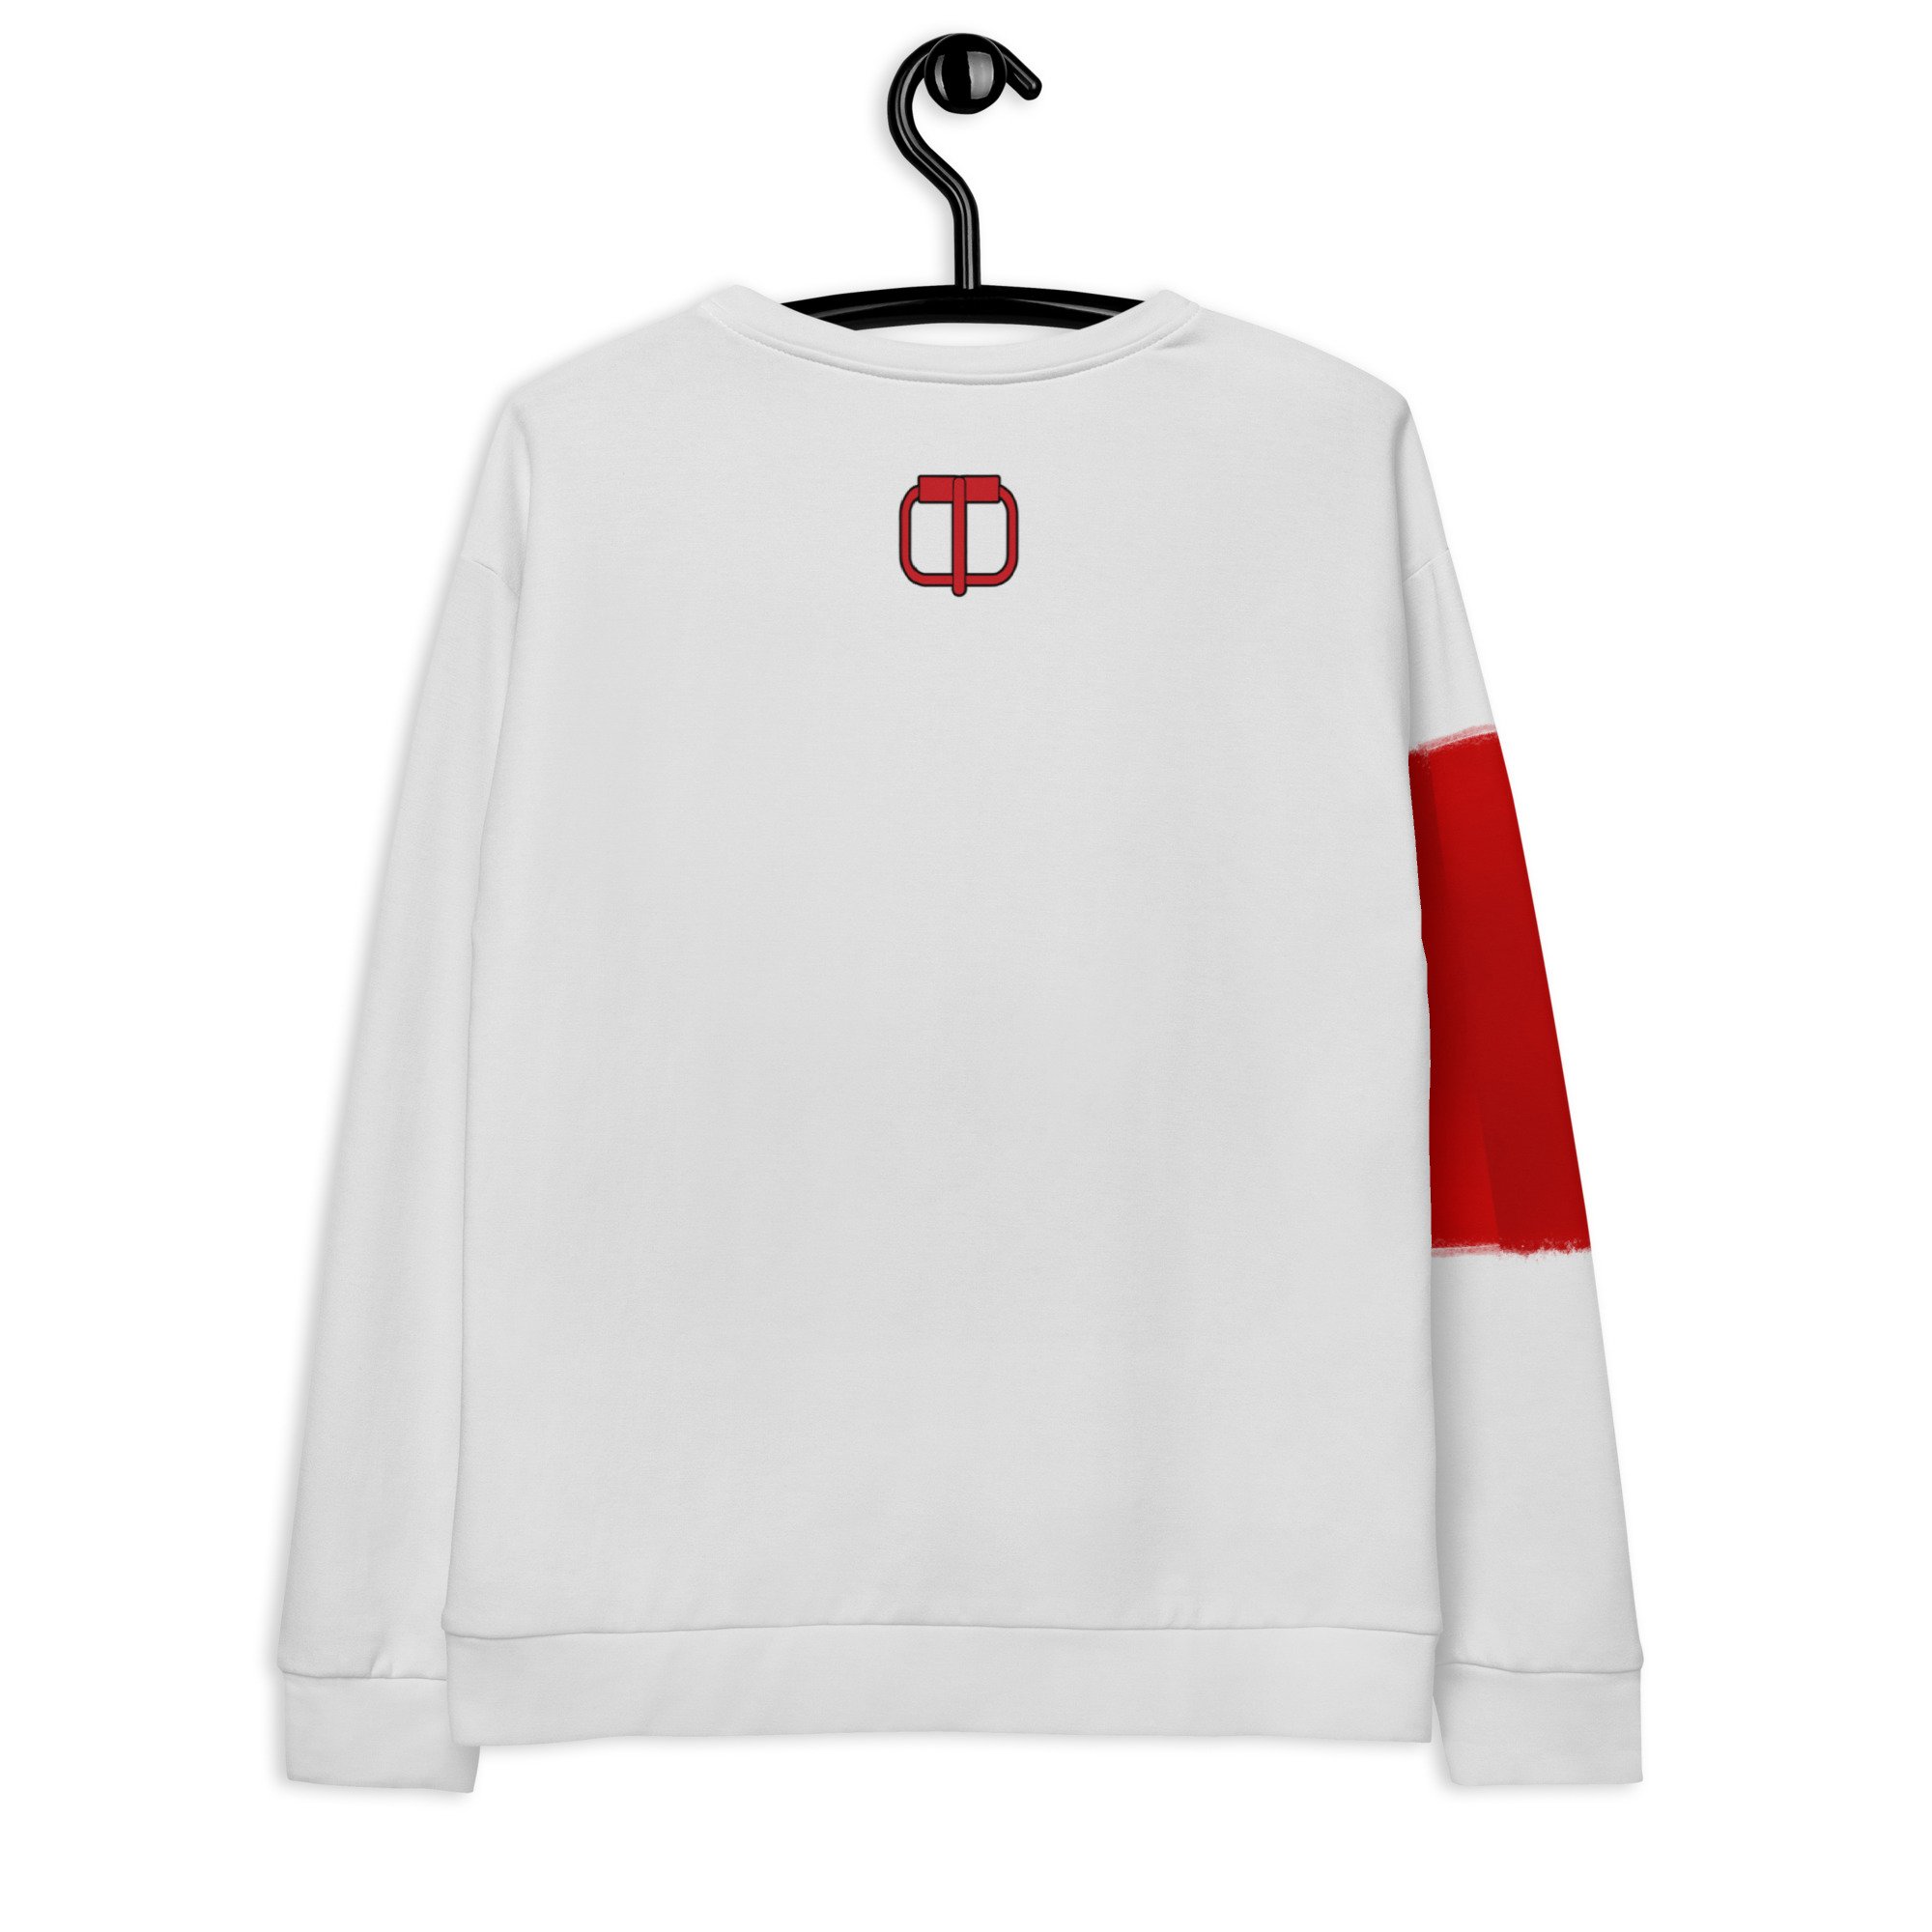 Top Notch NME Red Paint sweatshirt — Top Notch NME®️ - Official Website